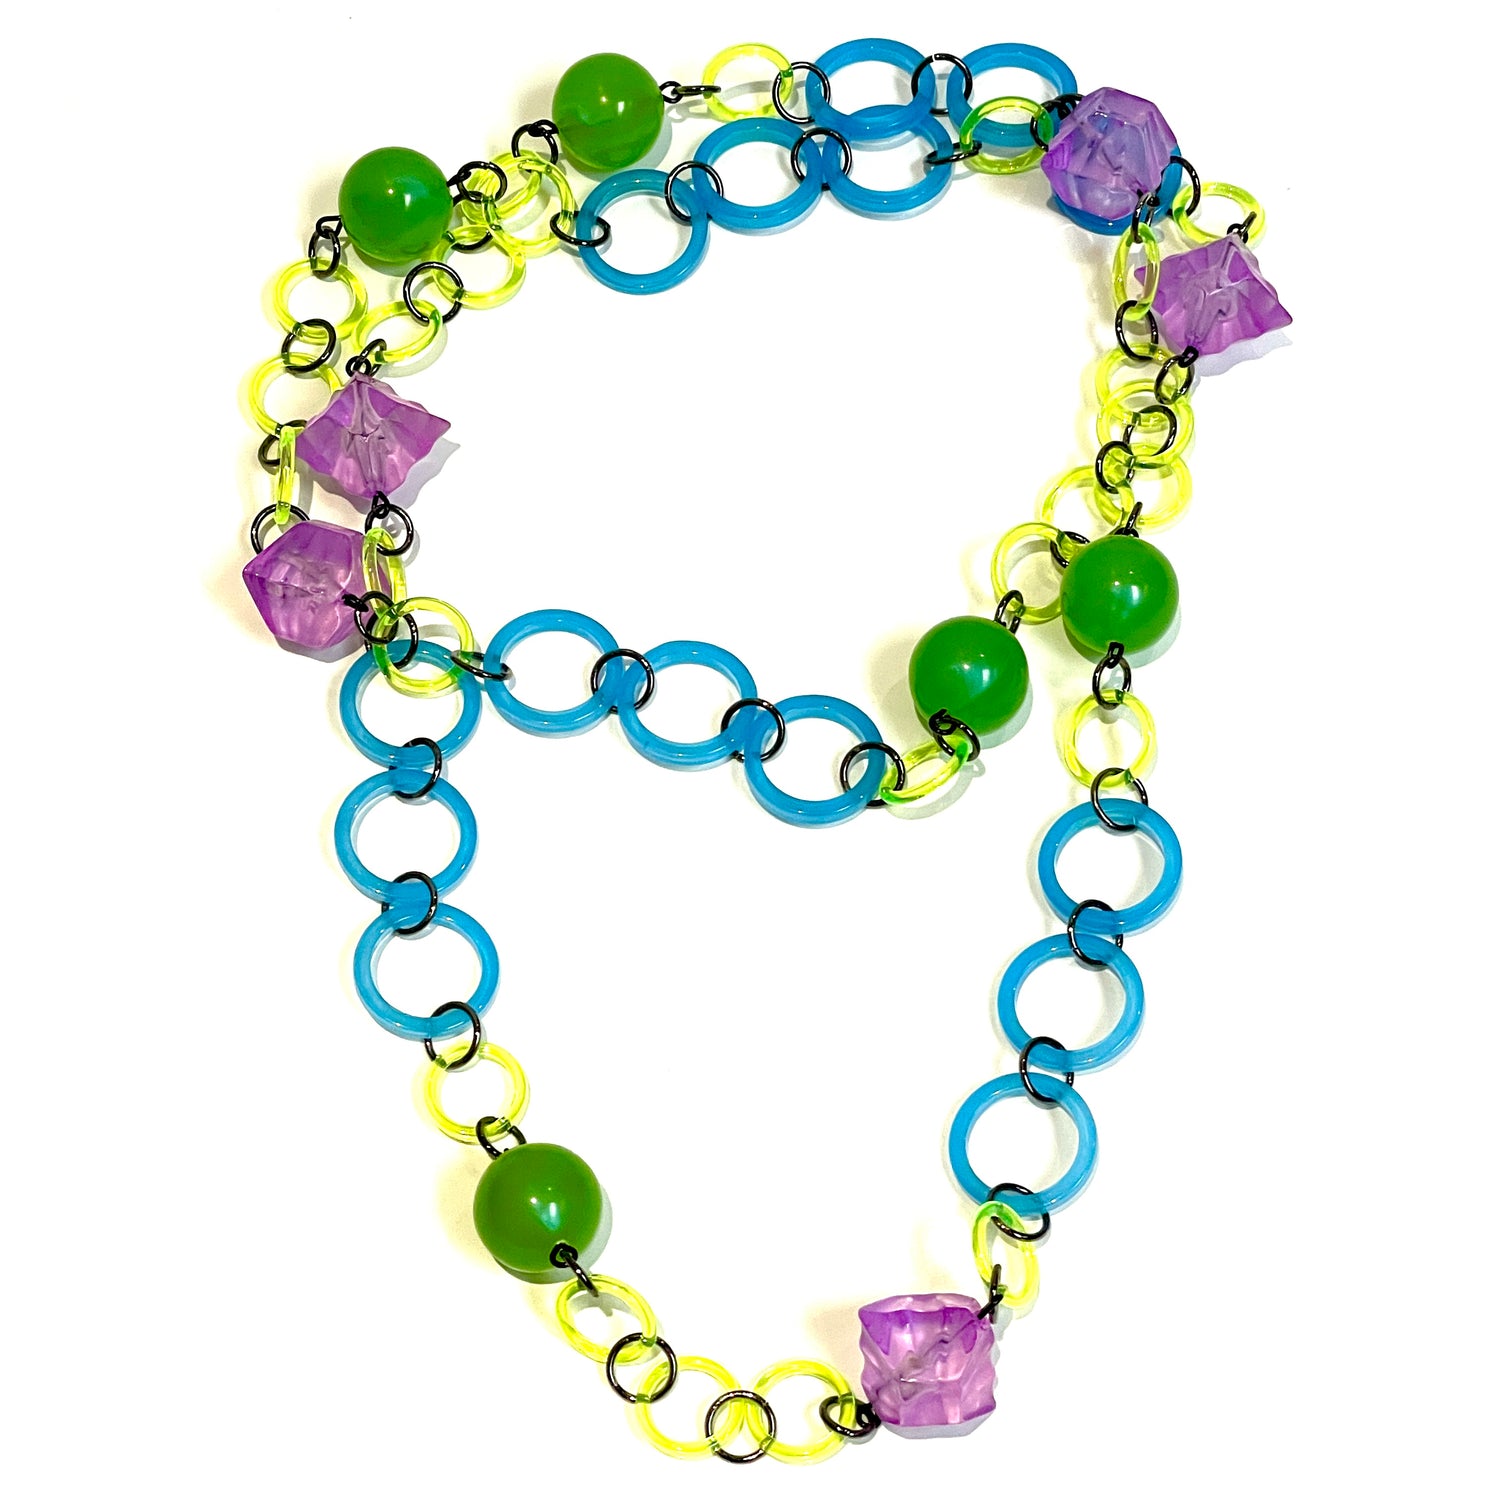 Linked Lucite Necklace